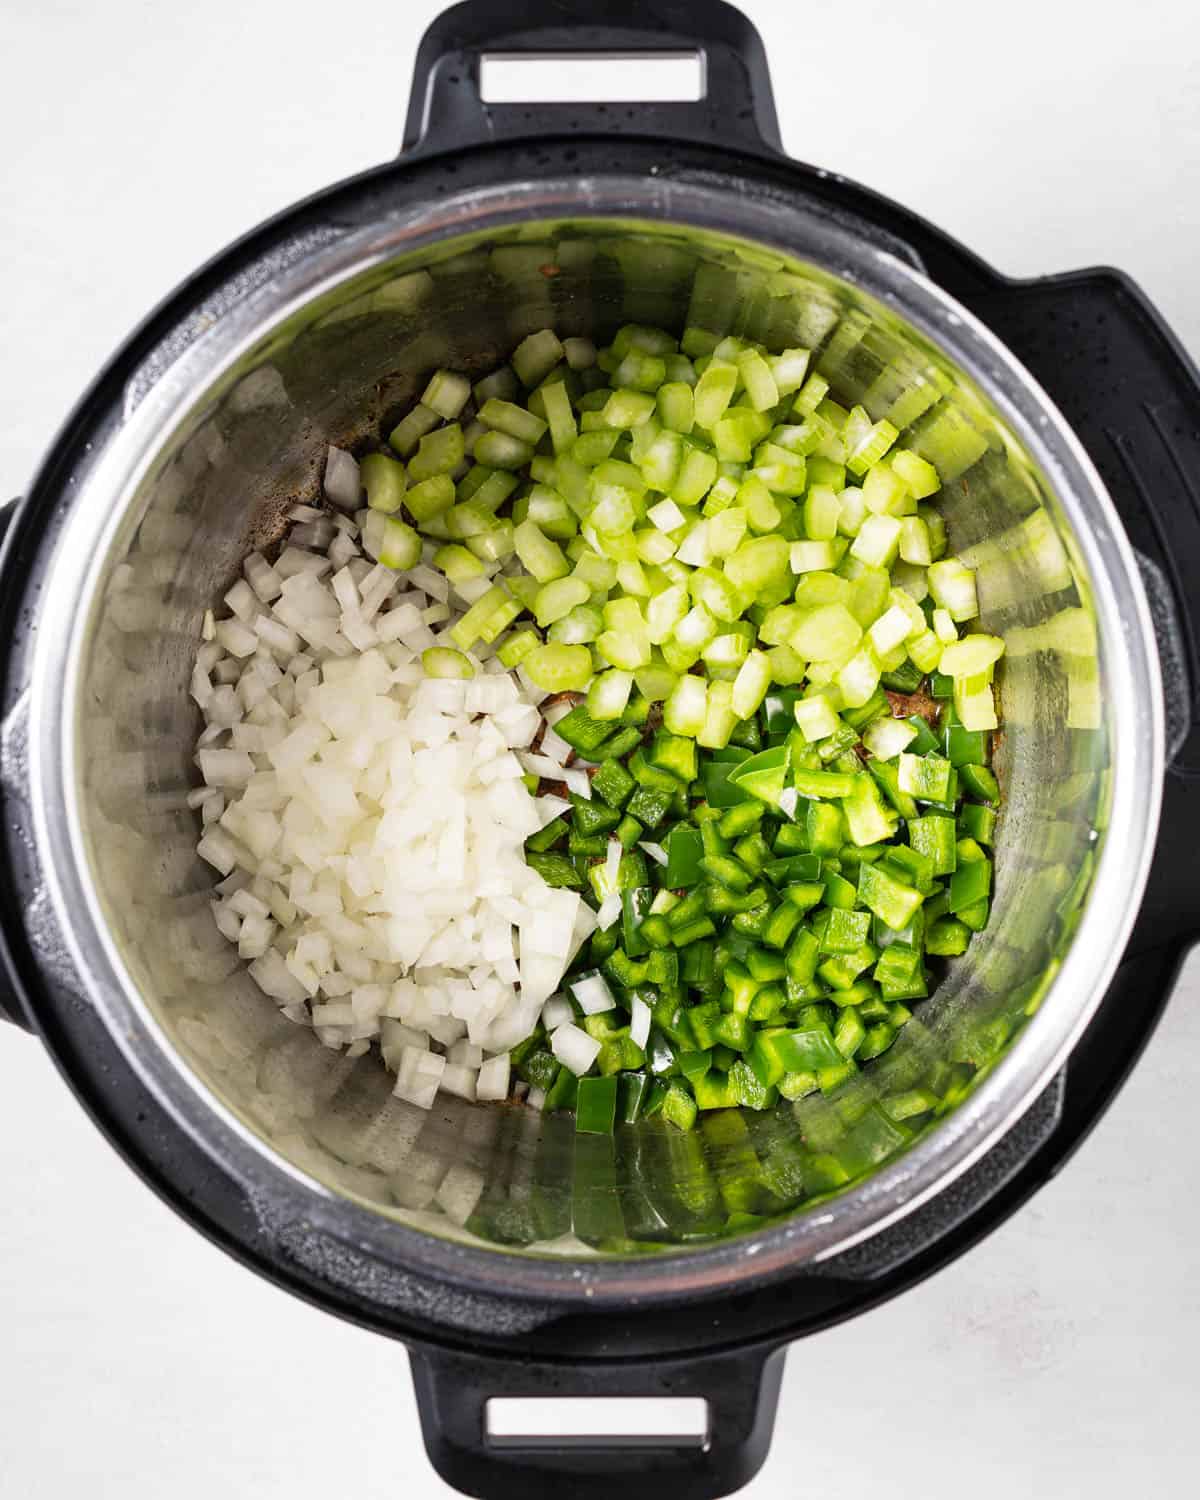 Sautéing onions, green bell peppers, and celery in the instant pot.